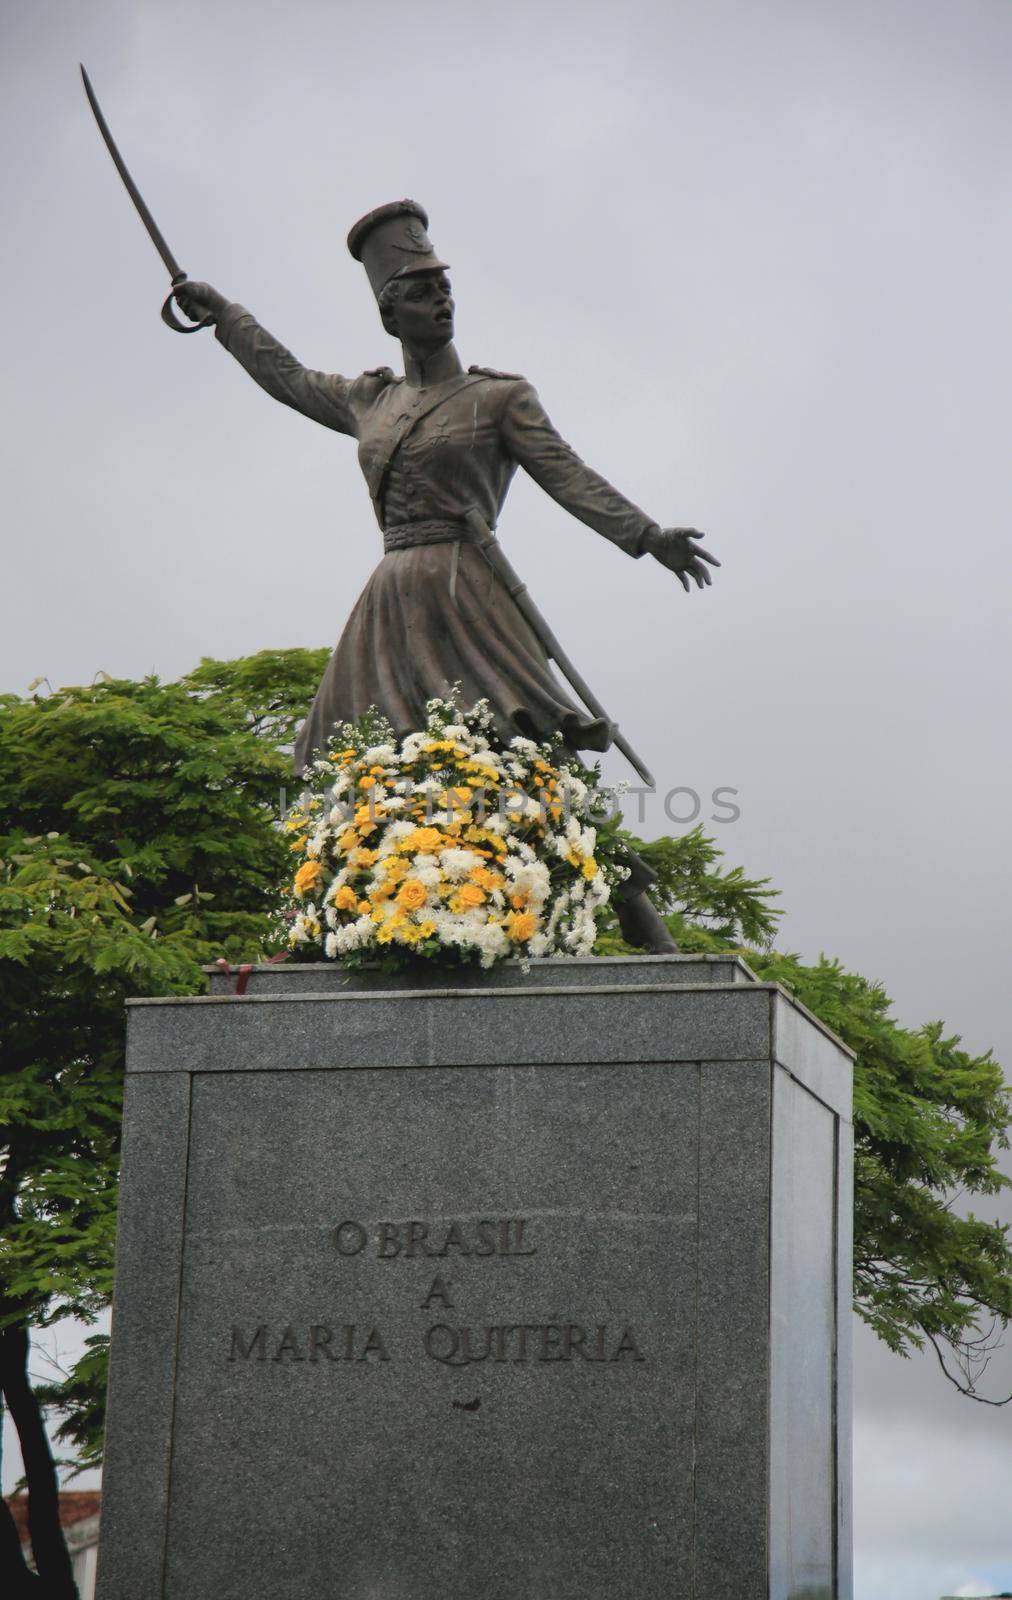 salvador, bahia, brazil - july 2, 2021: Monument to Maria Quiteria de Jesus, heroine of the struggles for independence of Bahia, is seen in the neighborhood of Lapinha, in the city of Salvador.